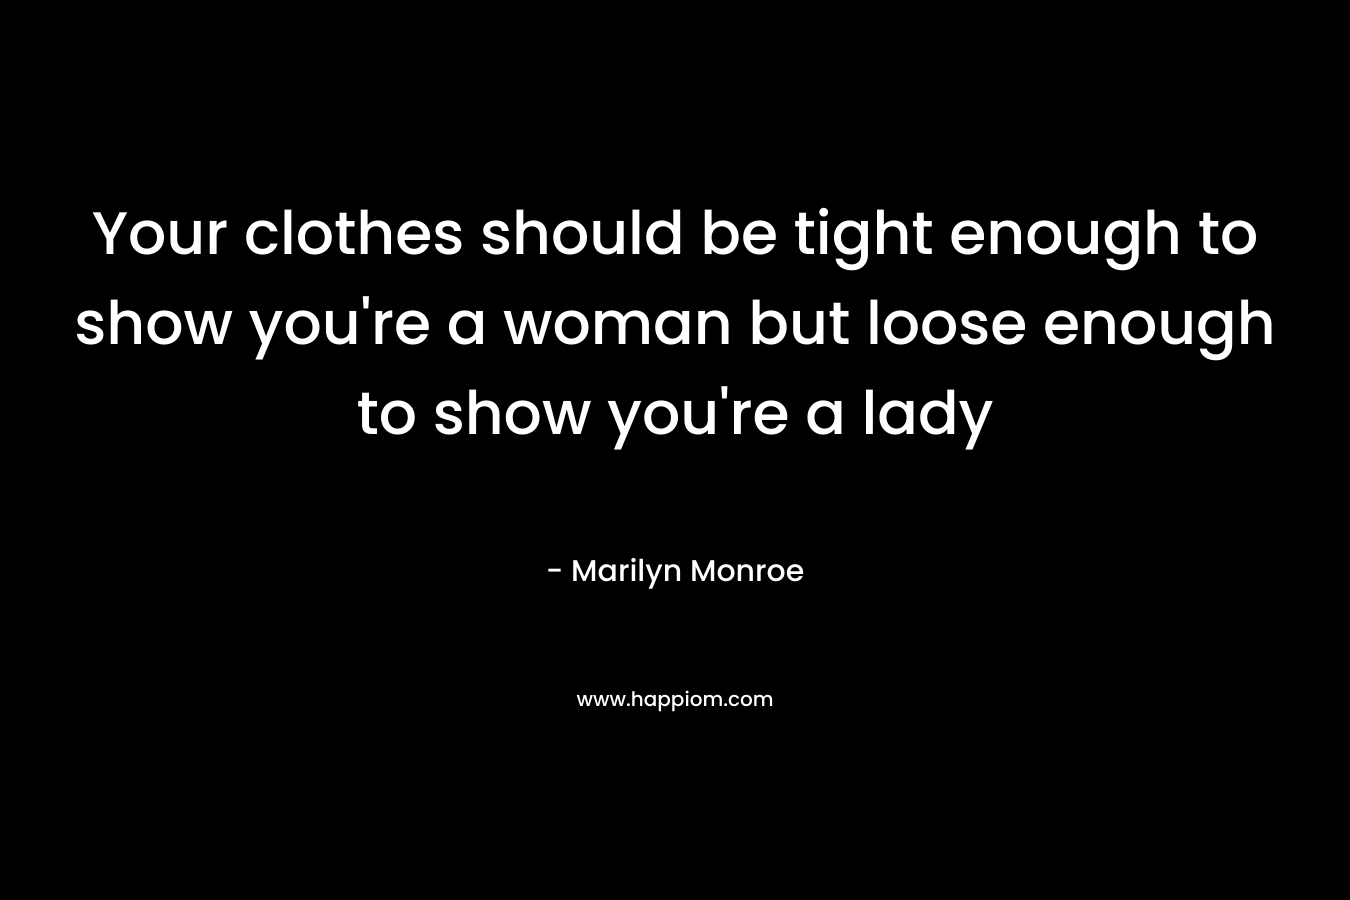 Your clothes should be tight enough to show you’re a woman but loose enough to show you’re a lady – Marilyn Monroe